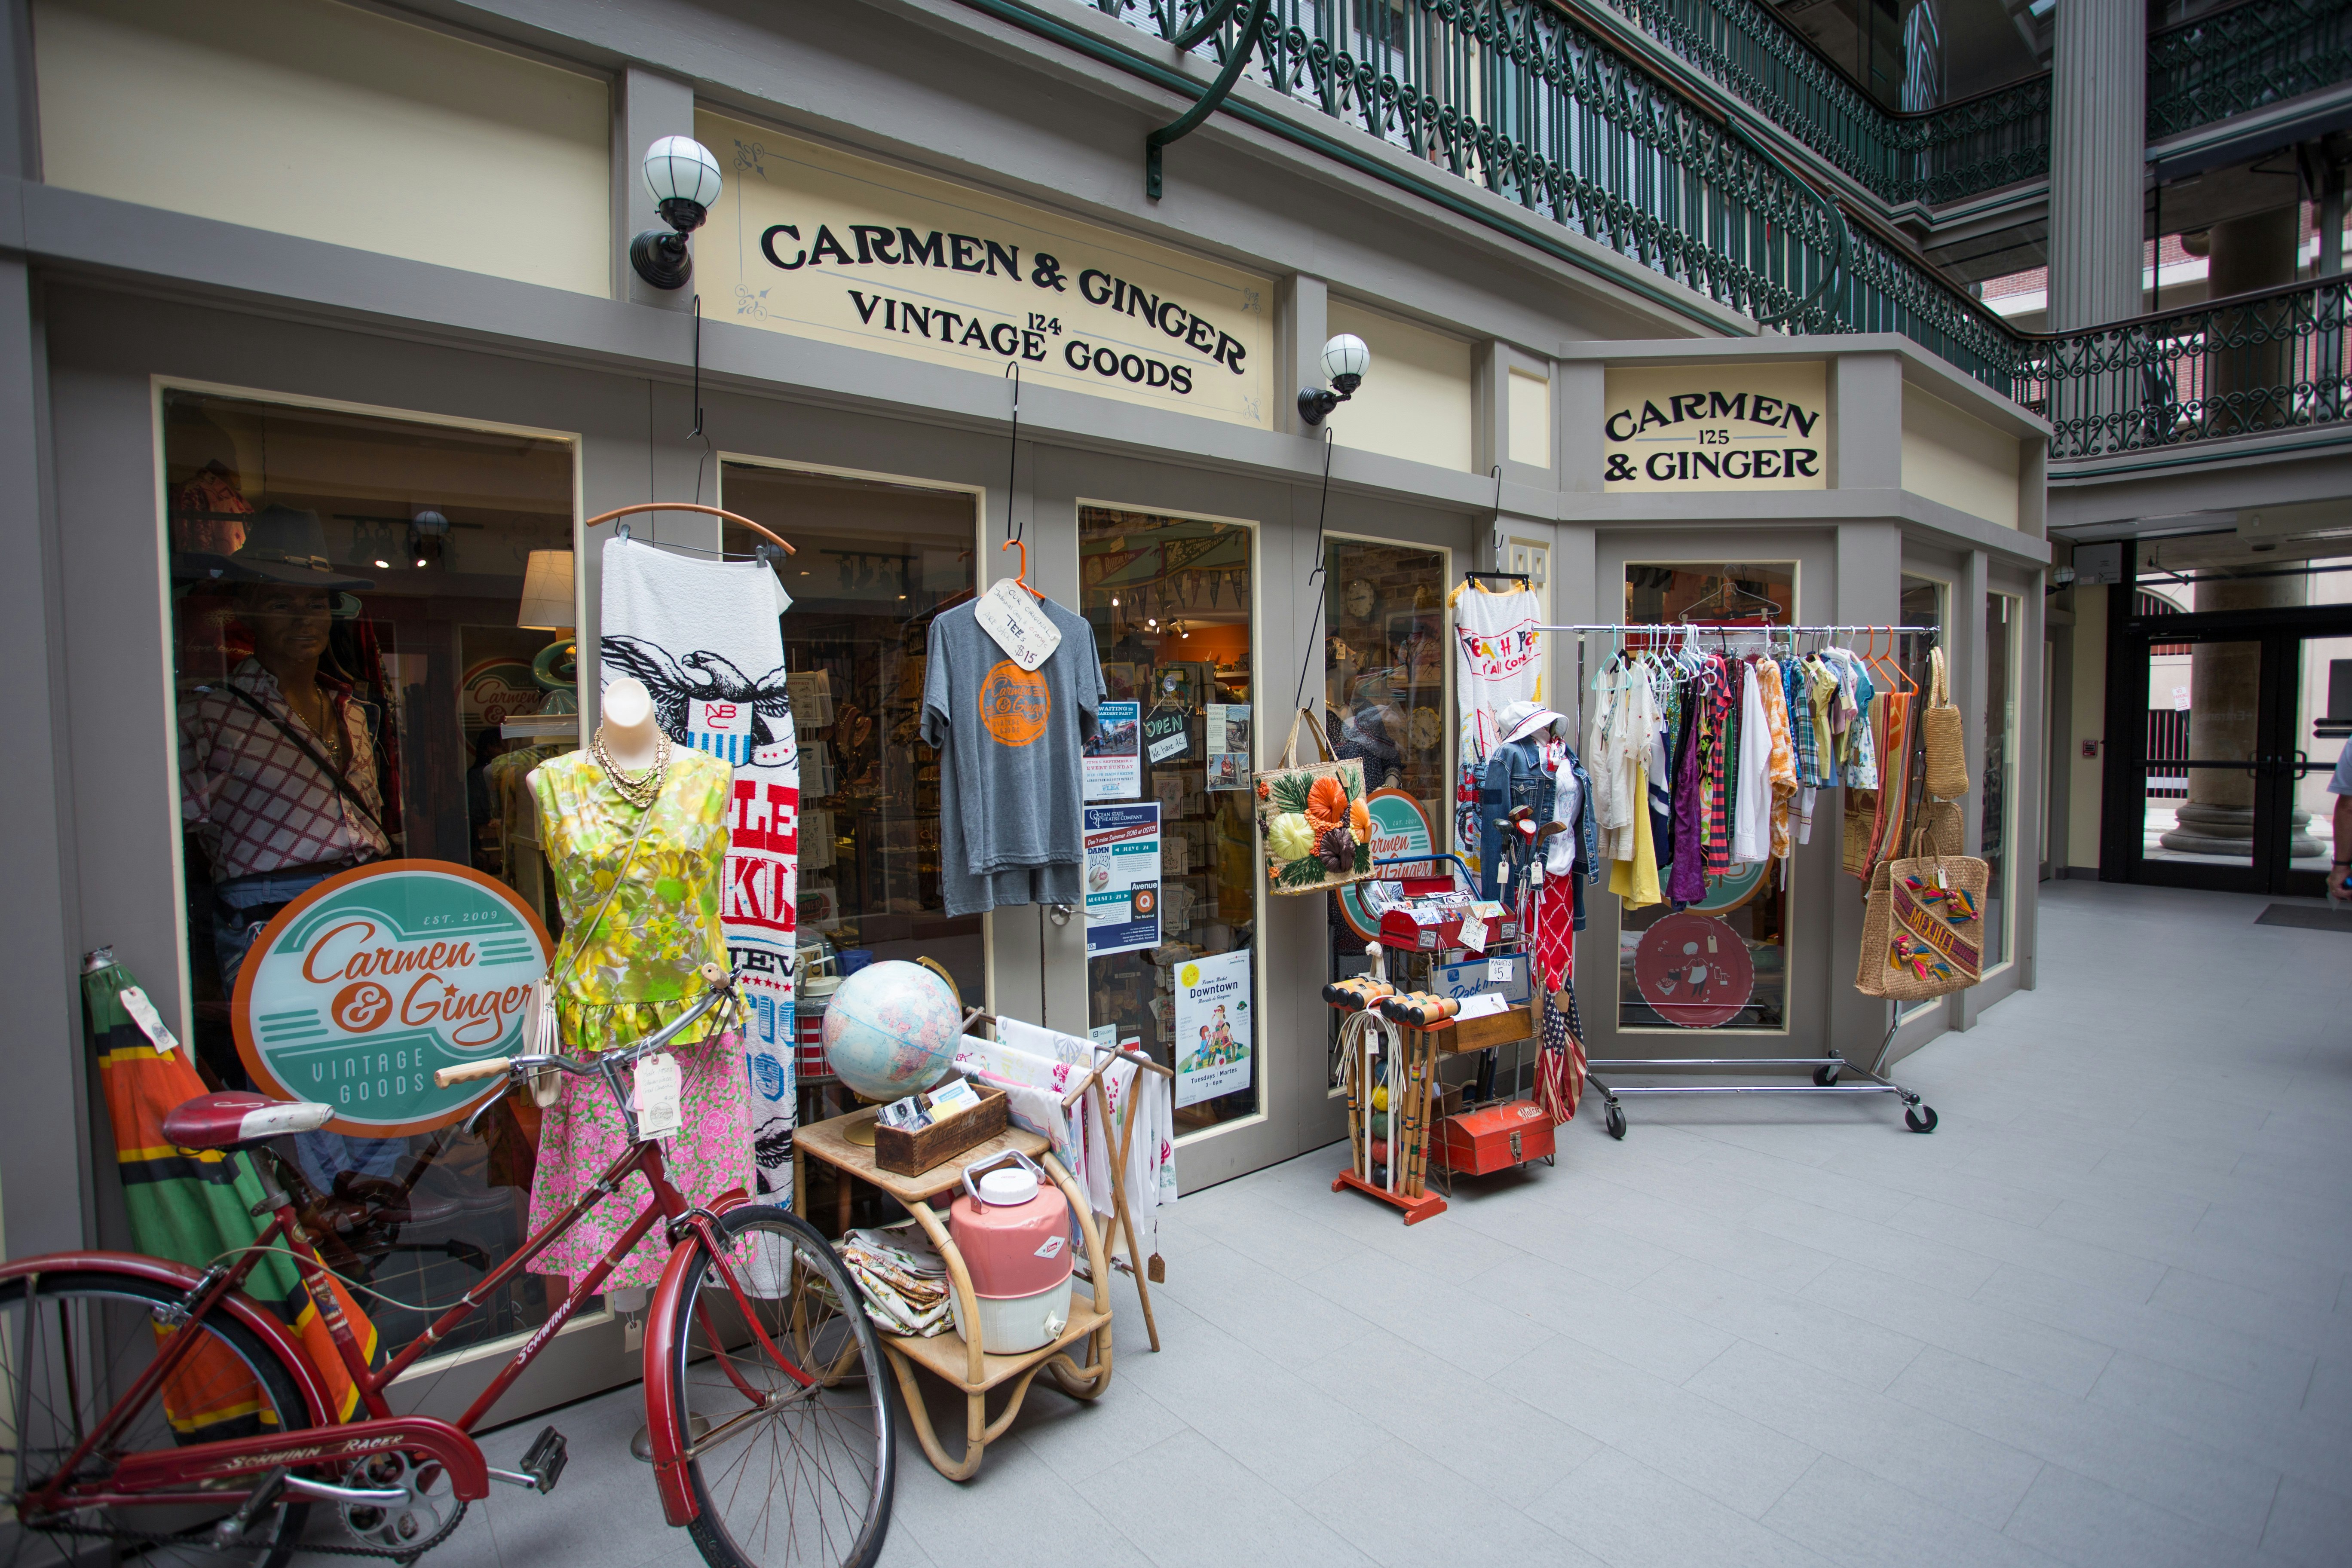 Facade of a vintage store with sign reading Carmen and Ginger and displays of dresses out front